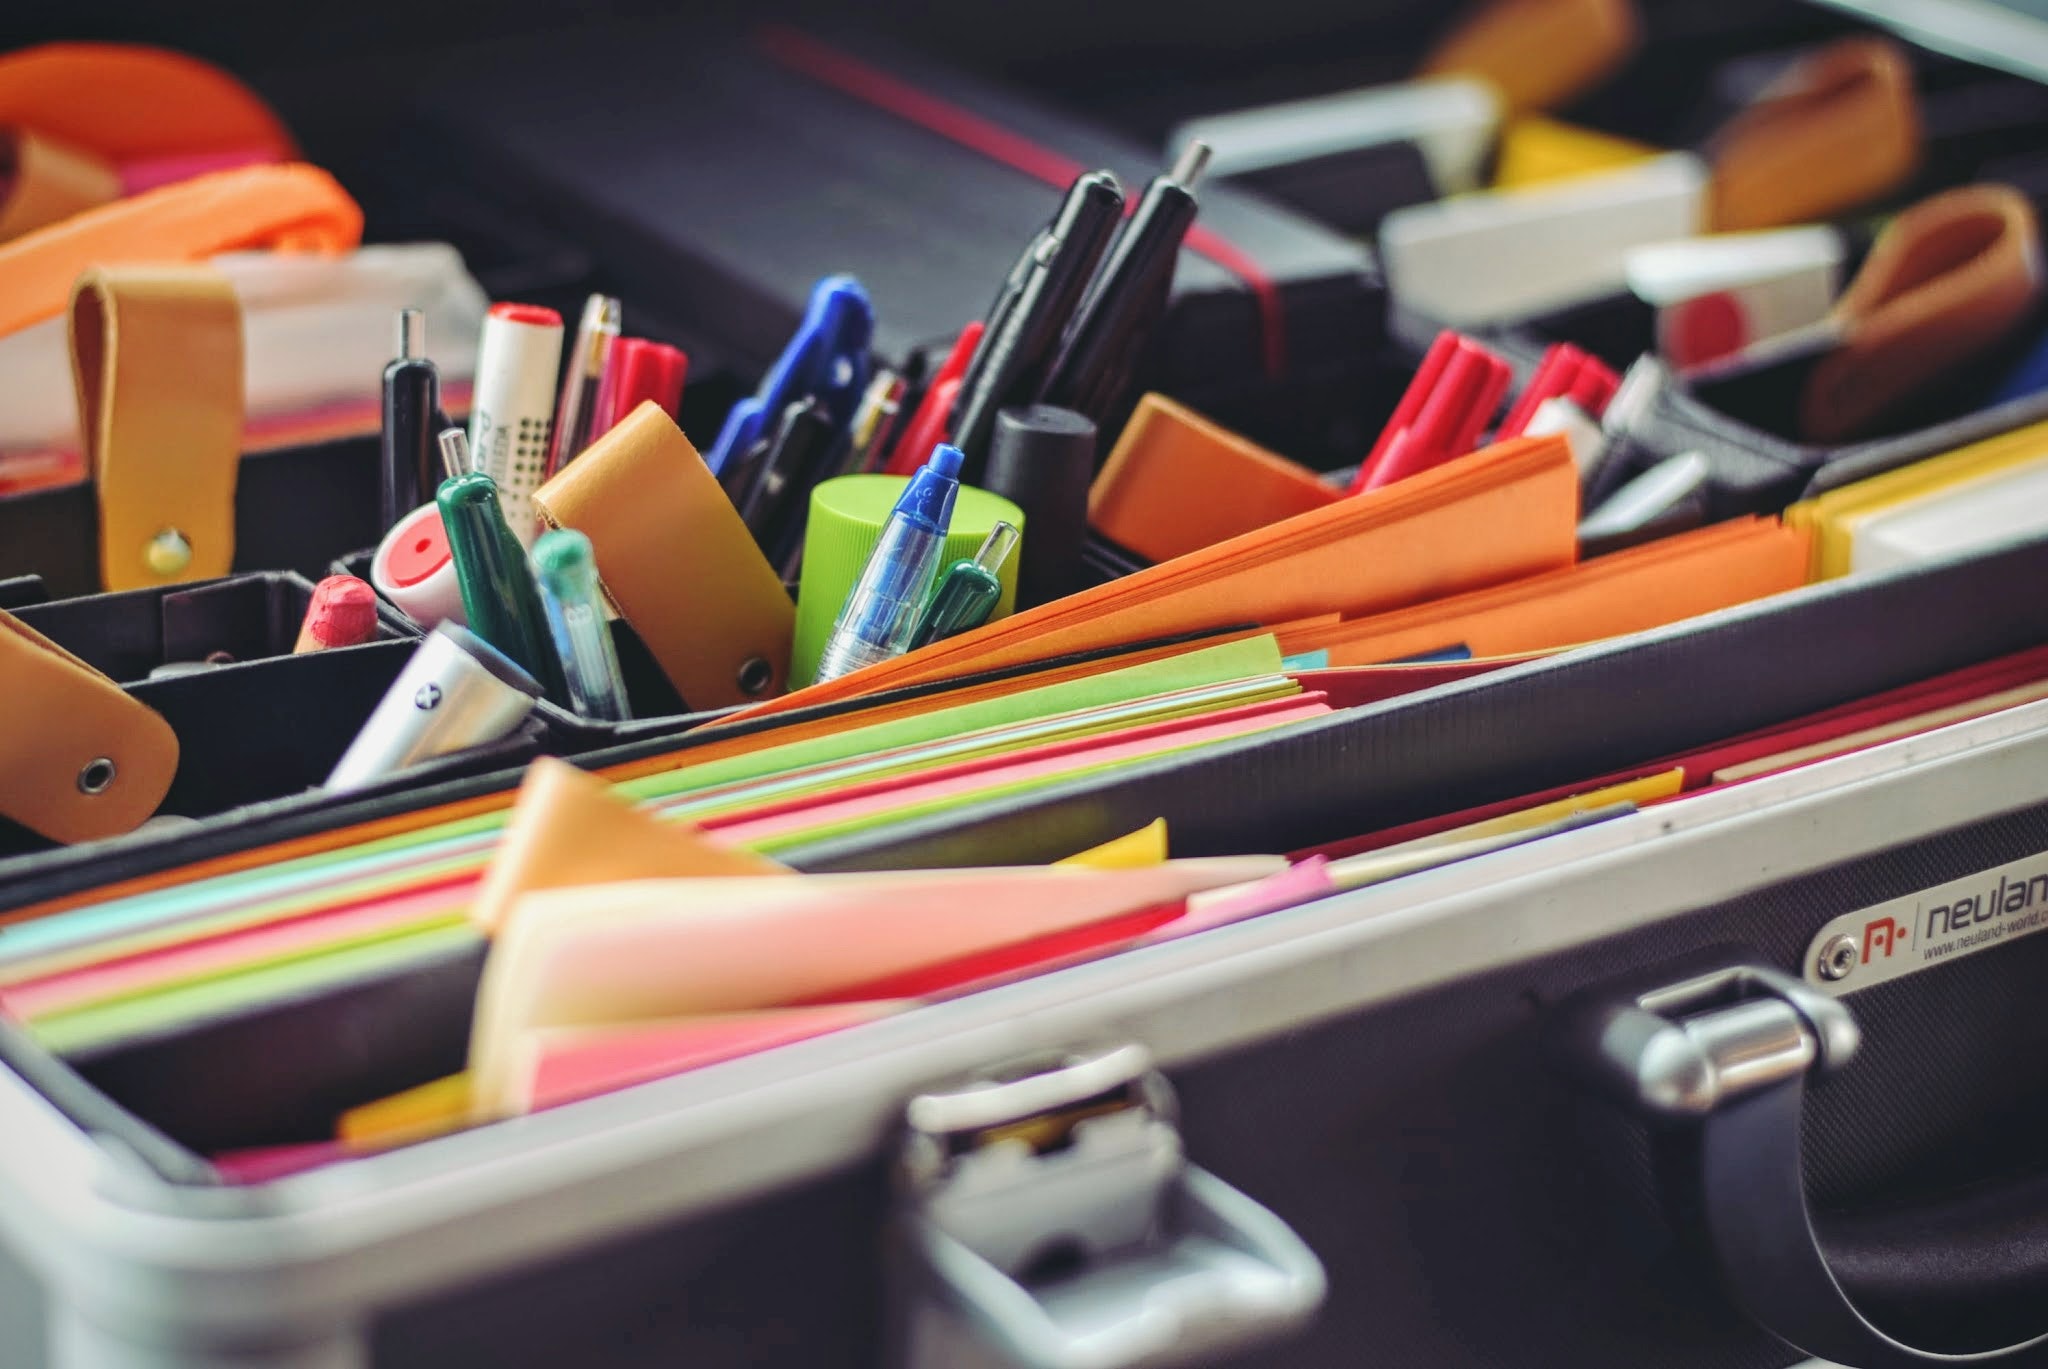 What Are Some Office Stationary Options for You to Choose From?